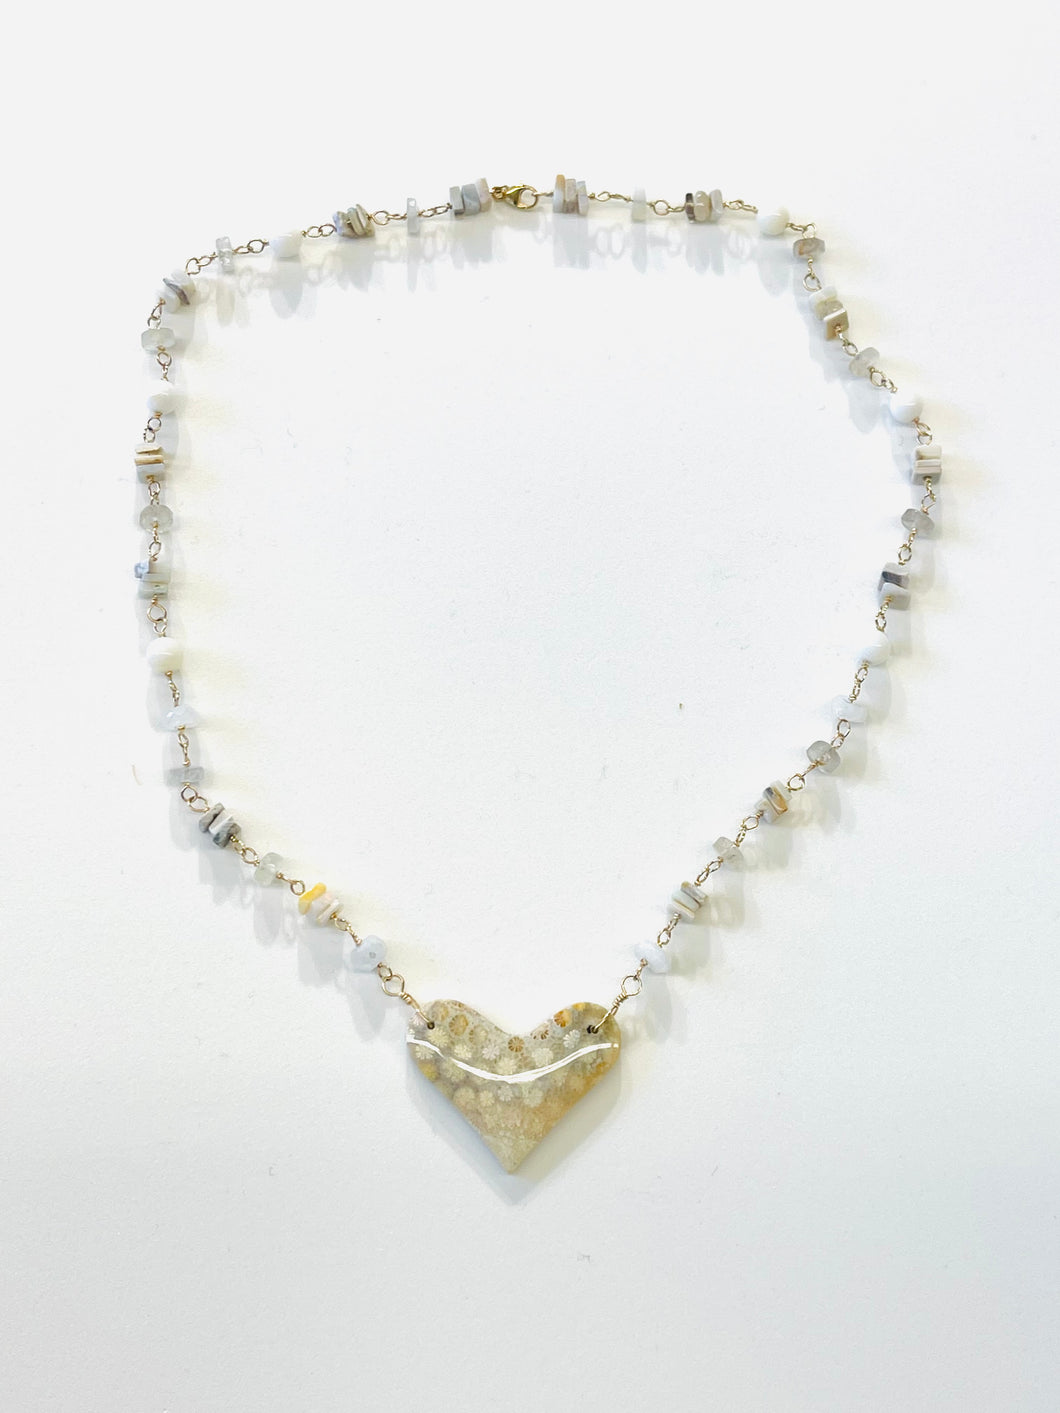 Necklace with white fossil coralligerous stones